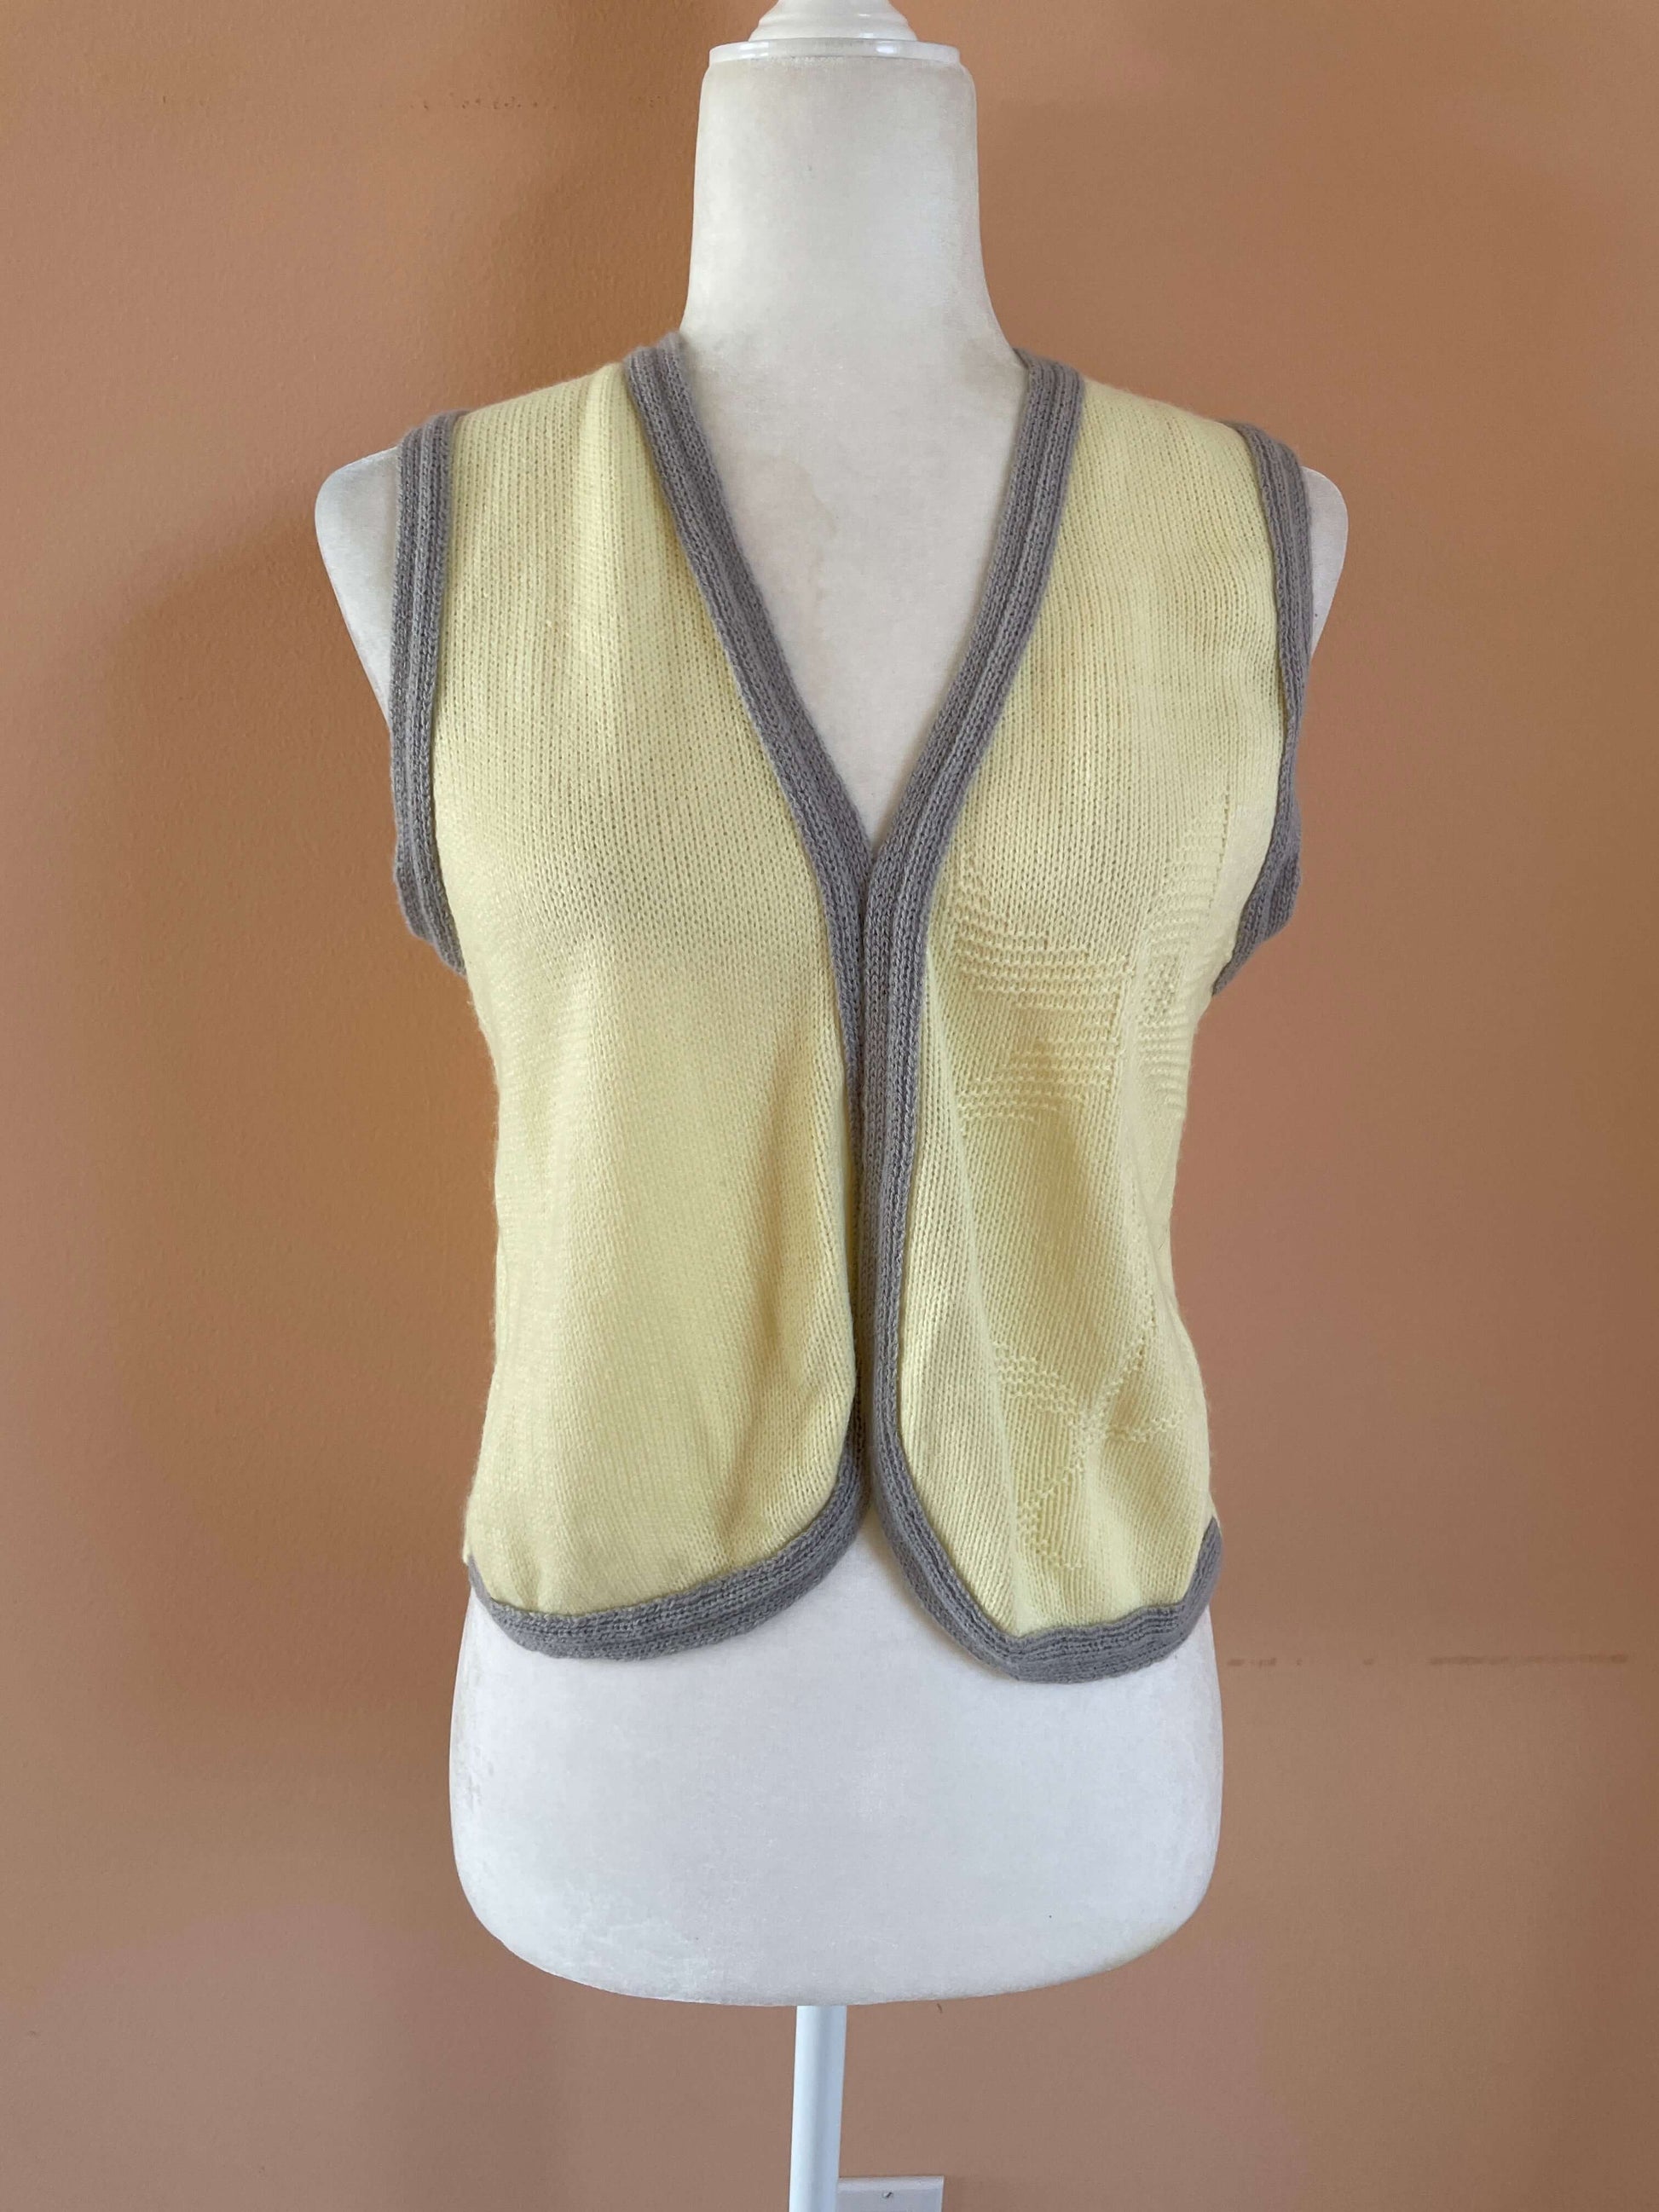  1980’s Acrylic Knit Pale Yellow Made in France Vest Top